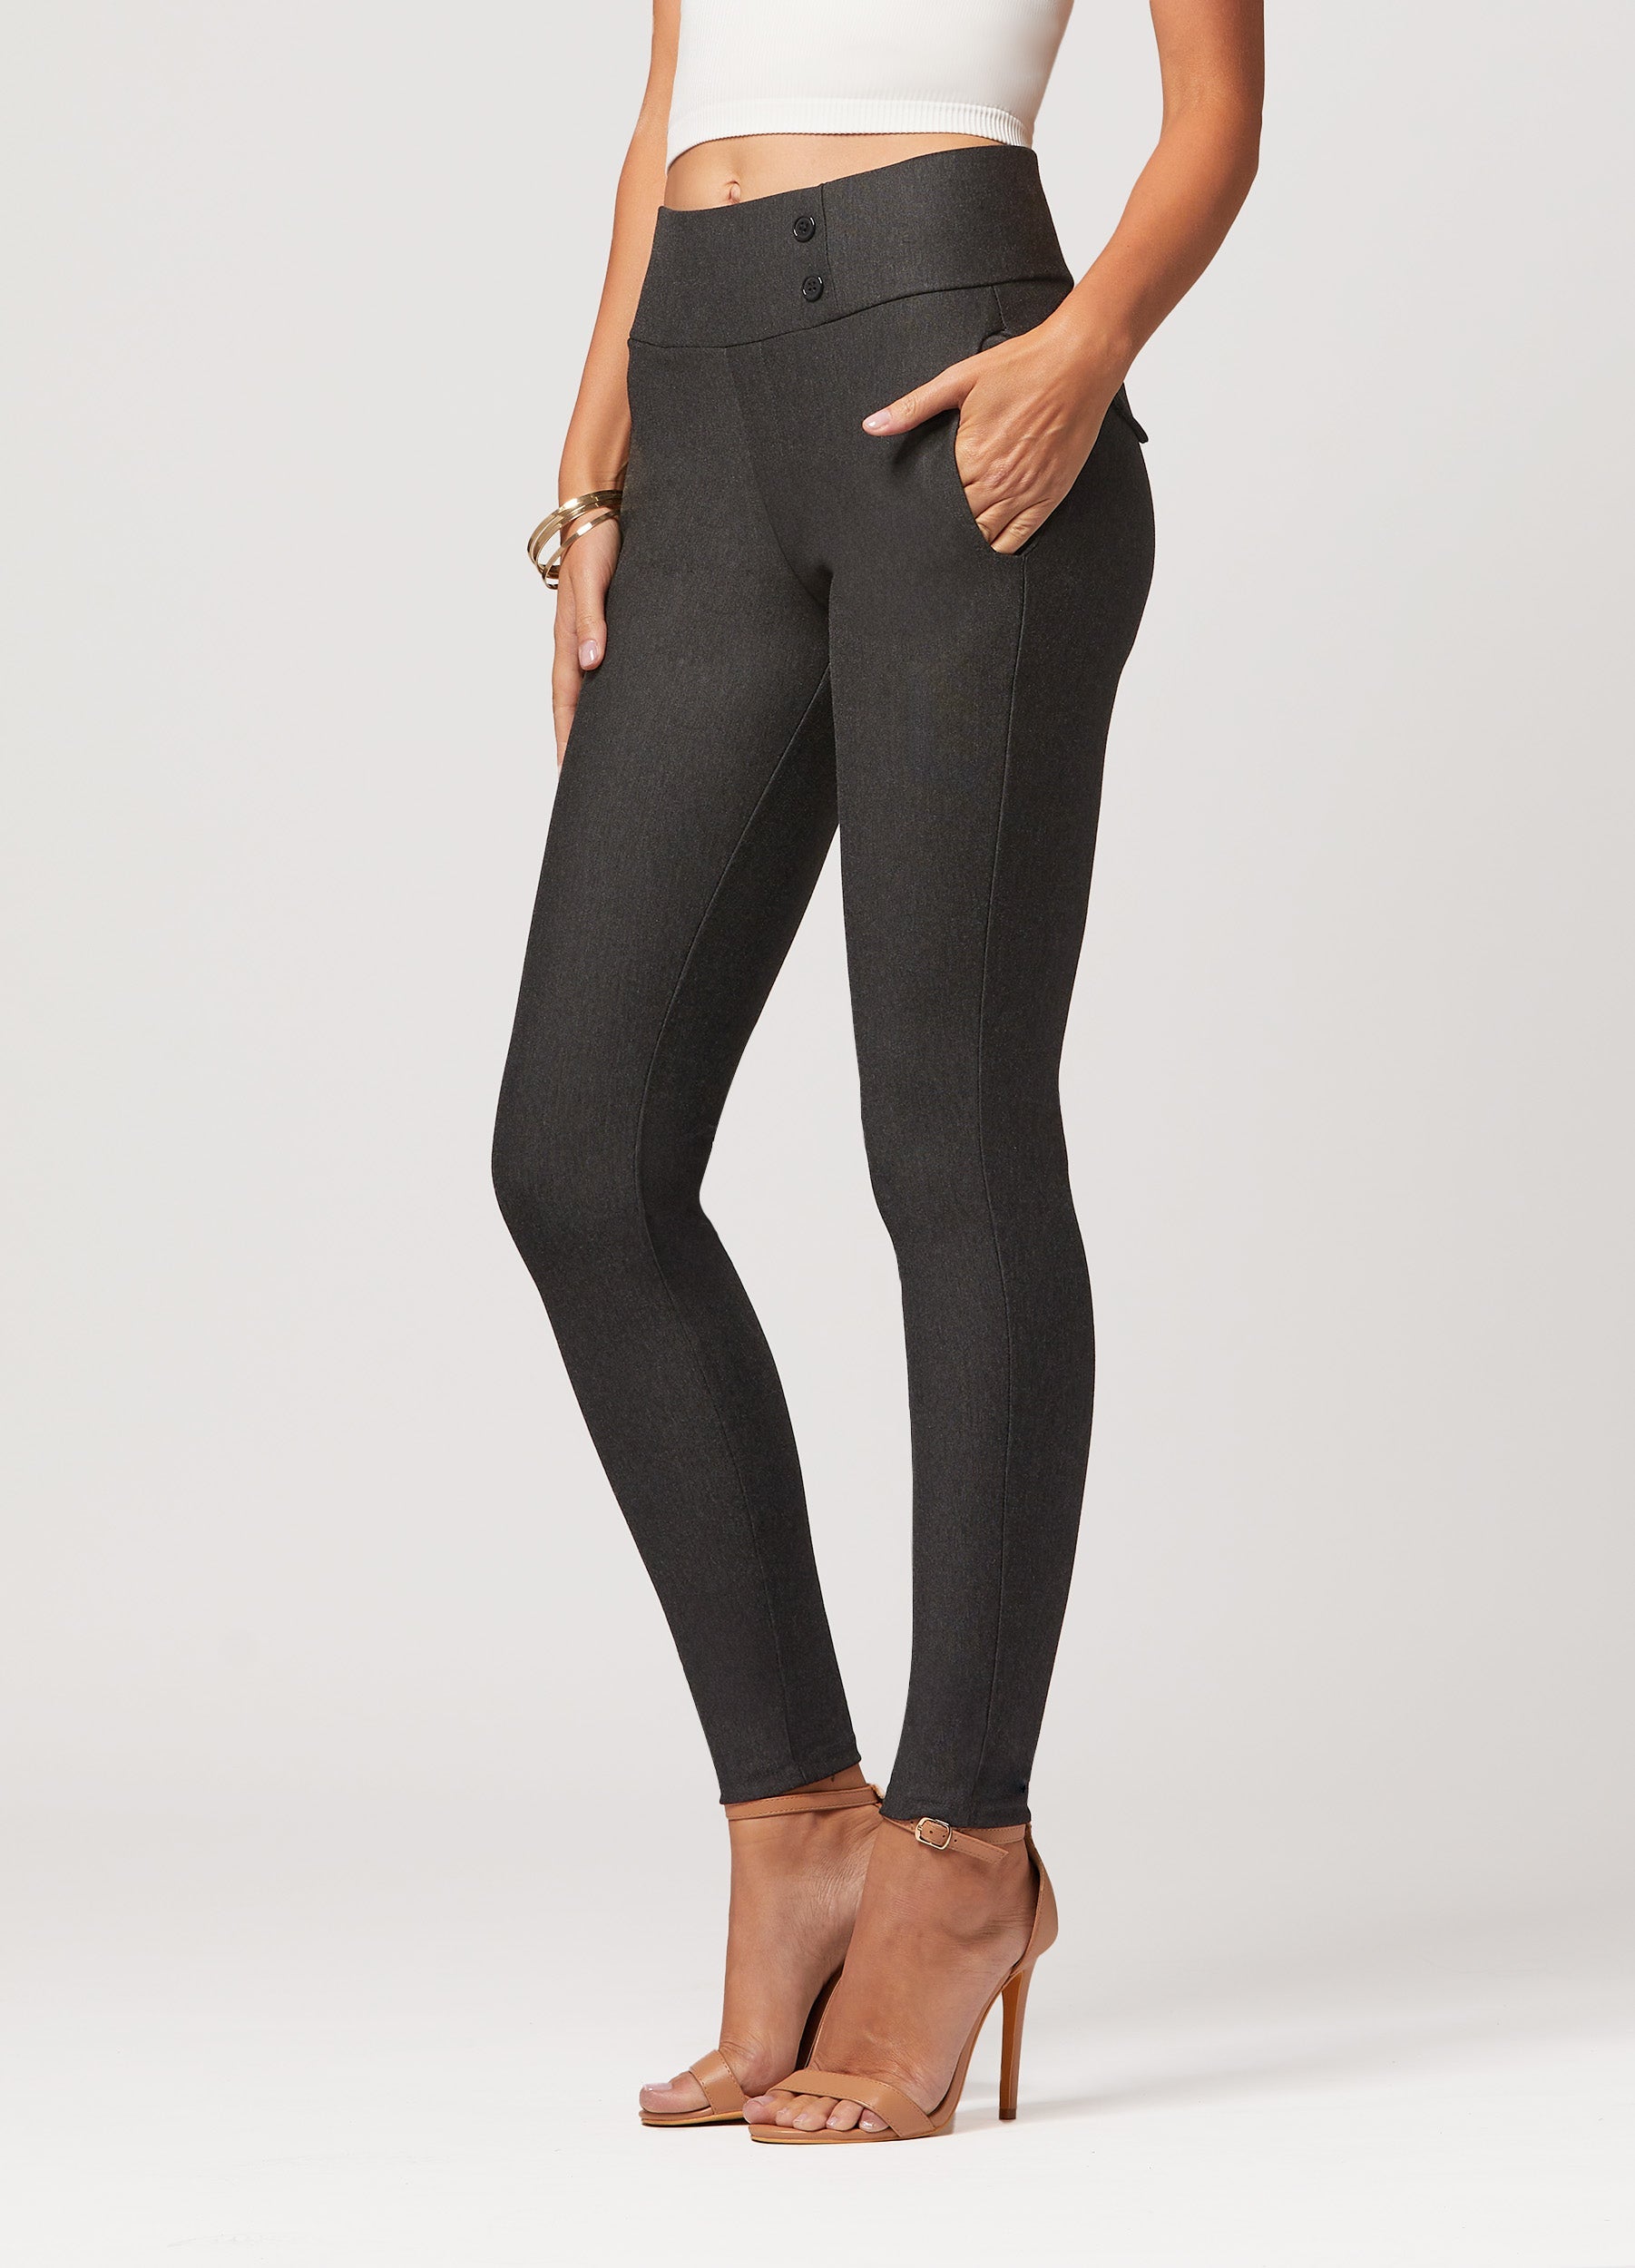 Innovate Ponte Knit Slim Dress Pants with Pockets - Conceited Co.